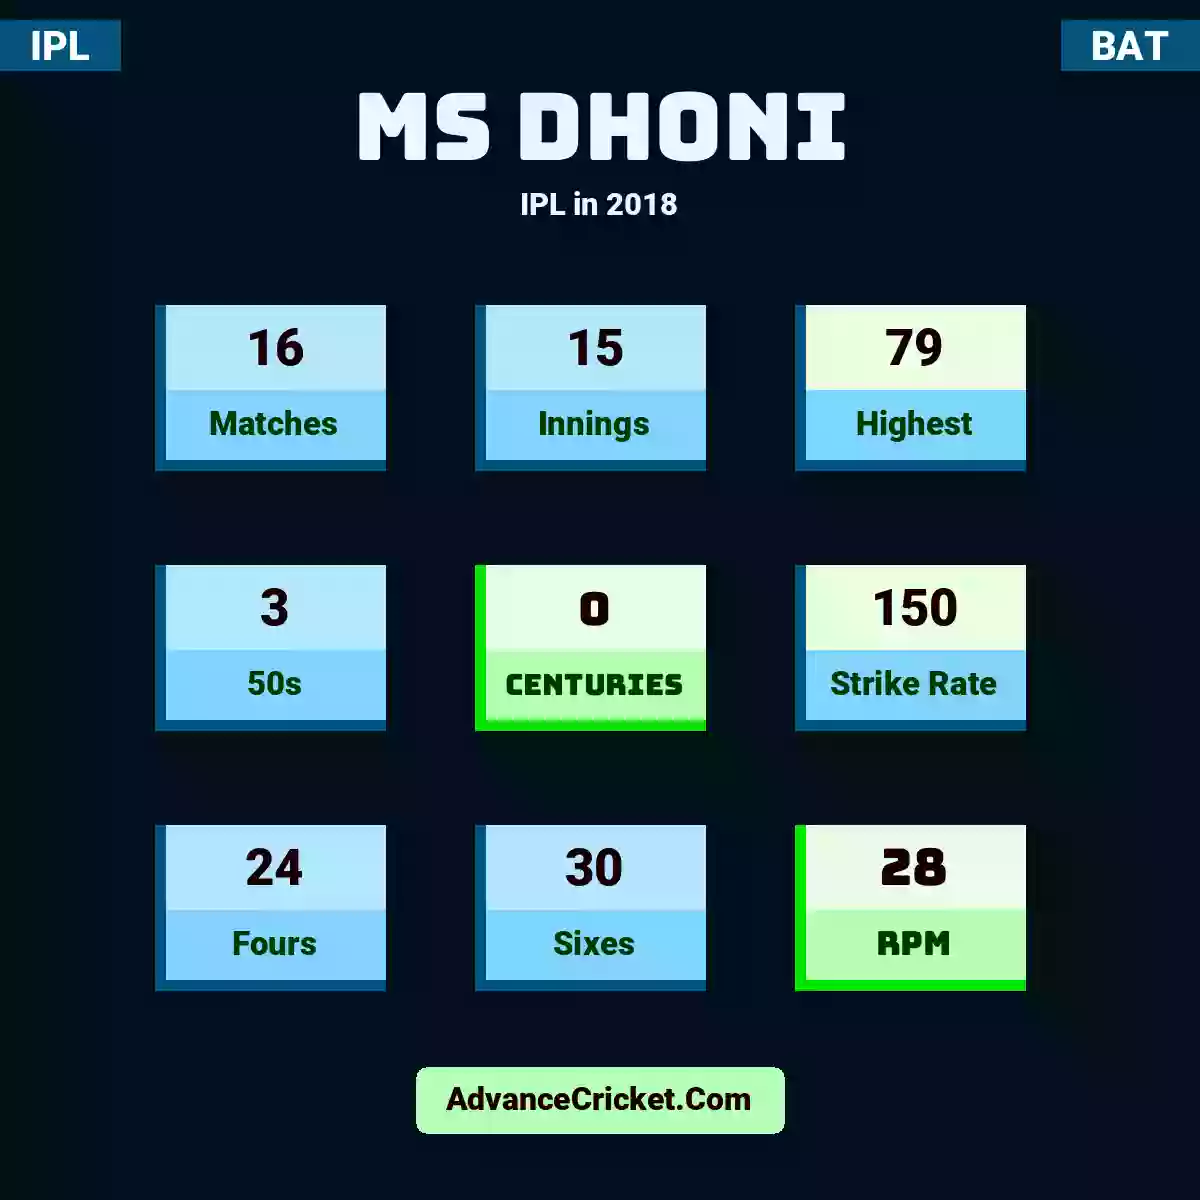 MS Dhoni IPL  in 2018, MS Dhoni played 16 matches, scored 79 runs as highest, 3 half-centuries, and 0 centuries, with a strike rate of 150. M.Dhoni hit 24 fours and 30 sixes, with an RPM of 28.